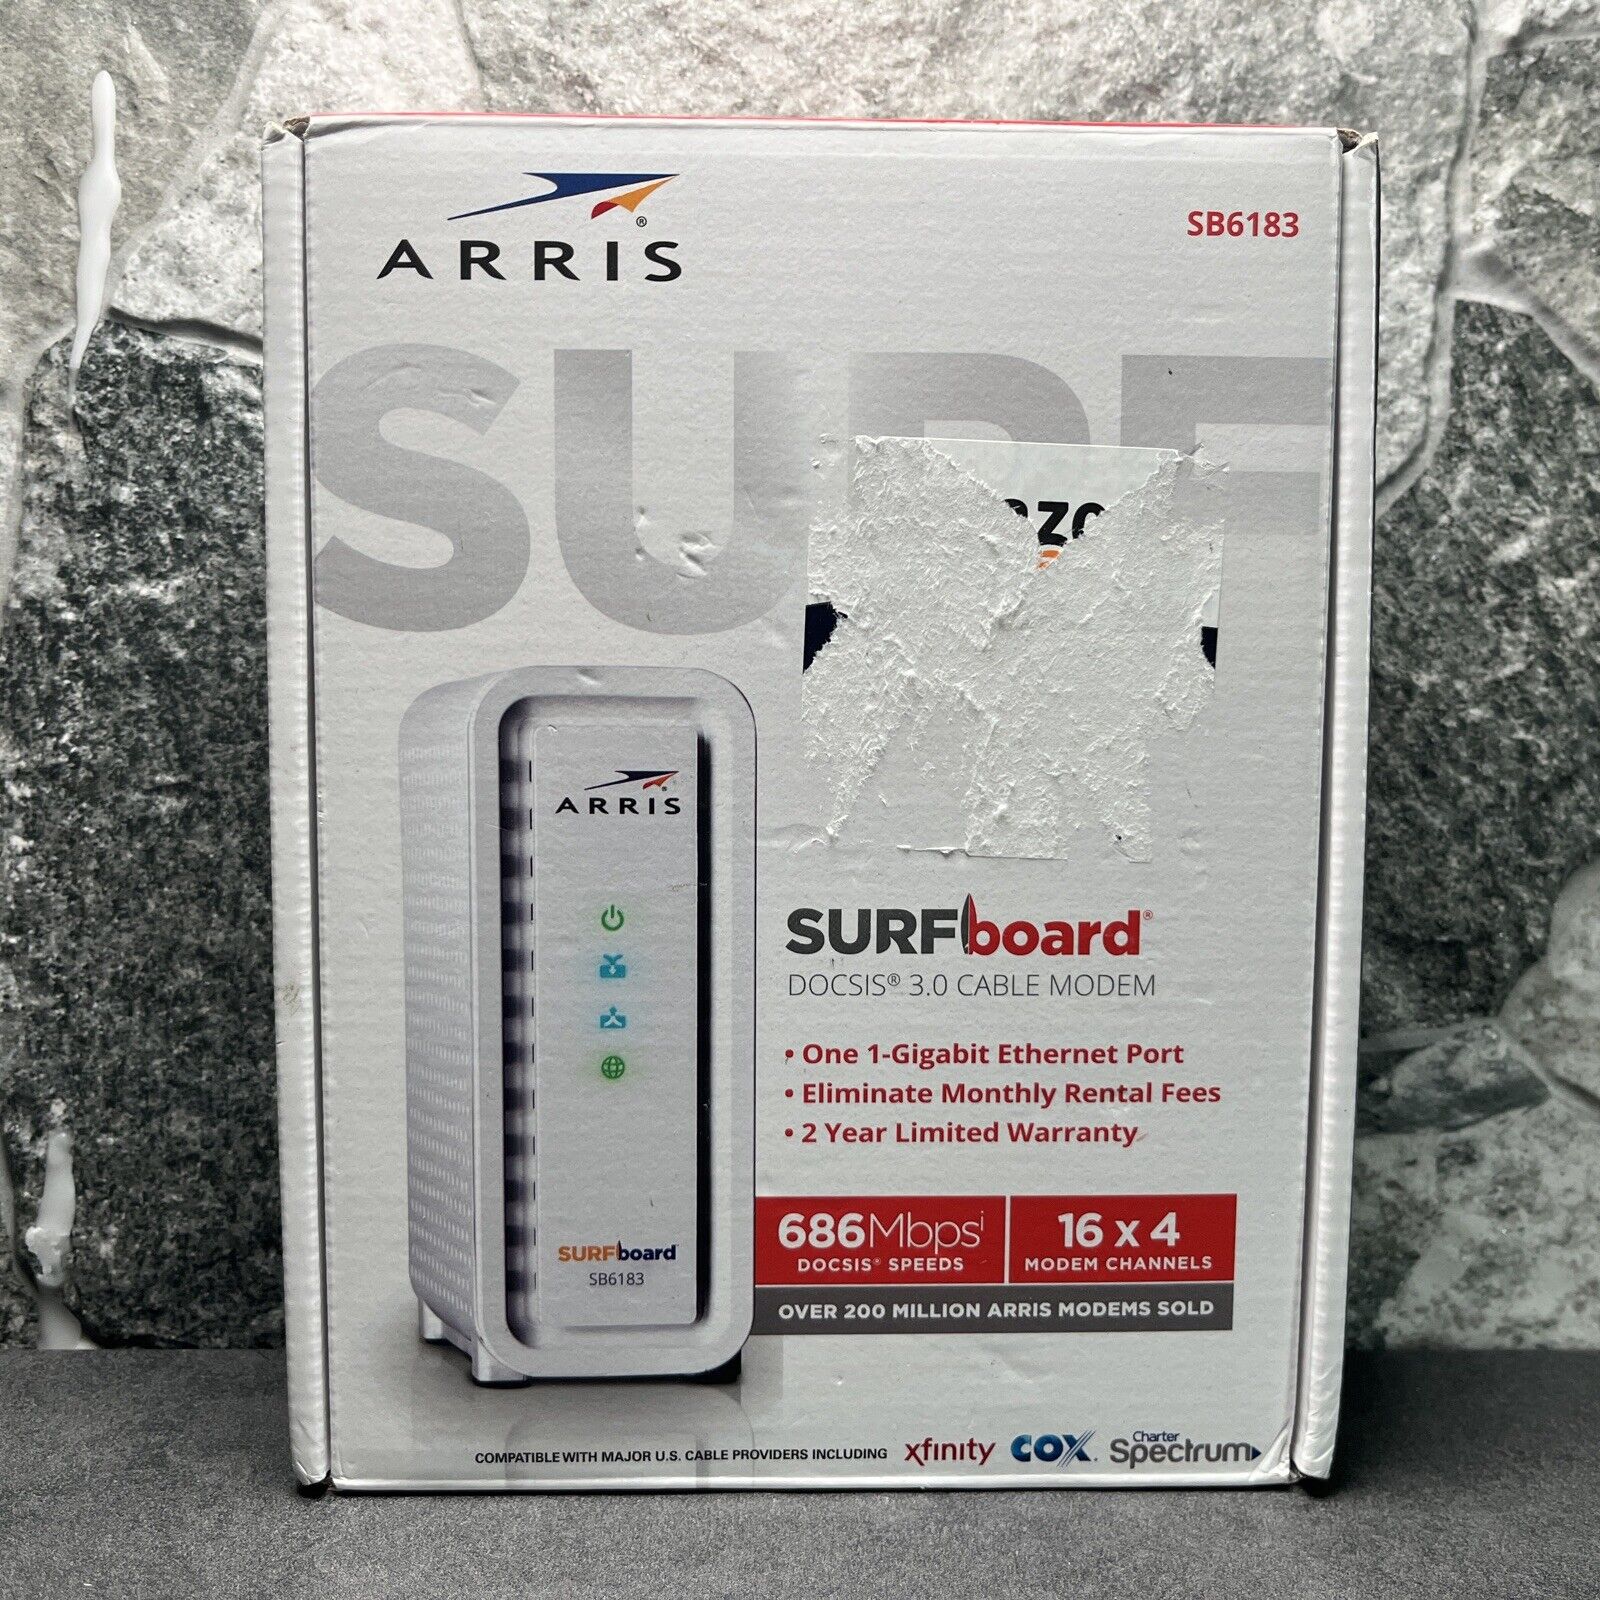 ARRIS Surfboard SB6183 DOCSIS 3.0 Cable Modem Compatible WIth Spectrum Xfinity